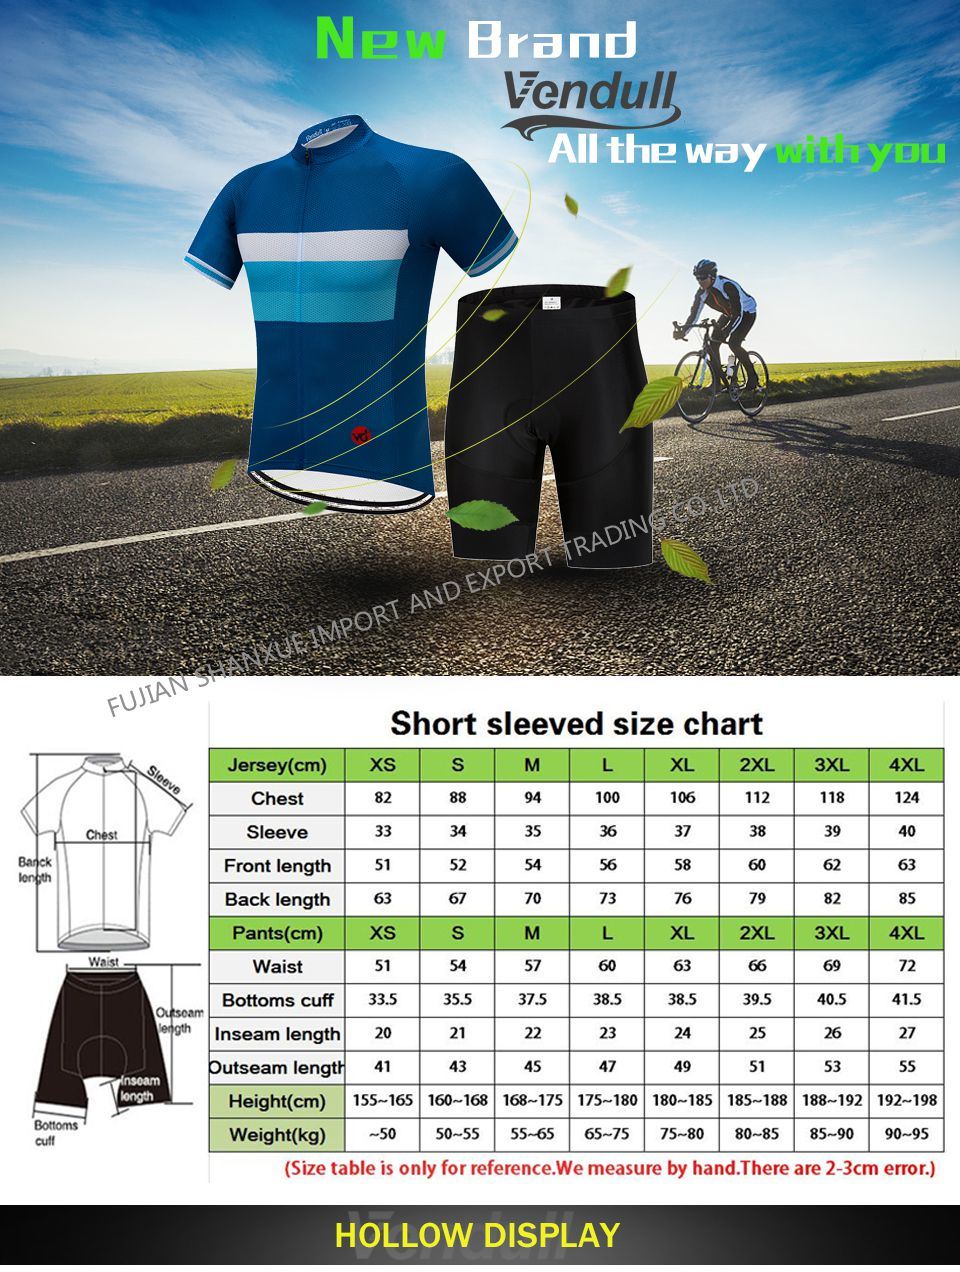 Breathable Quick Dry Short Sleeve Team Uniform Sport Clothing Custom Cycling Jerseys Suits for Men